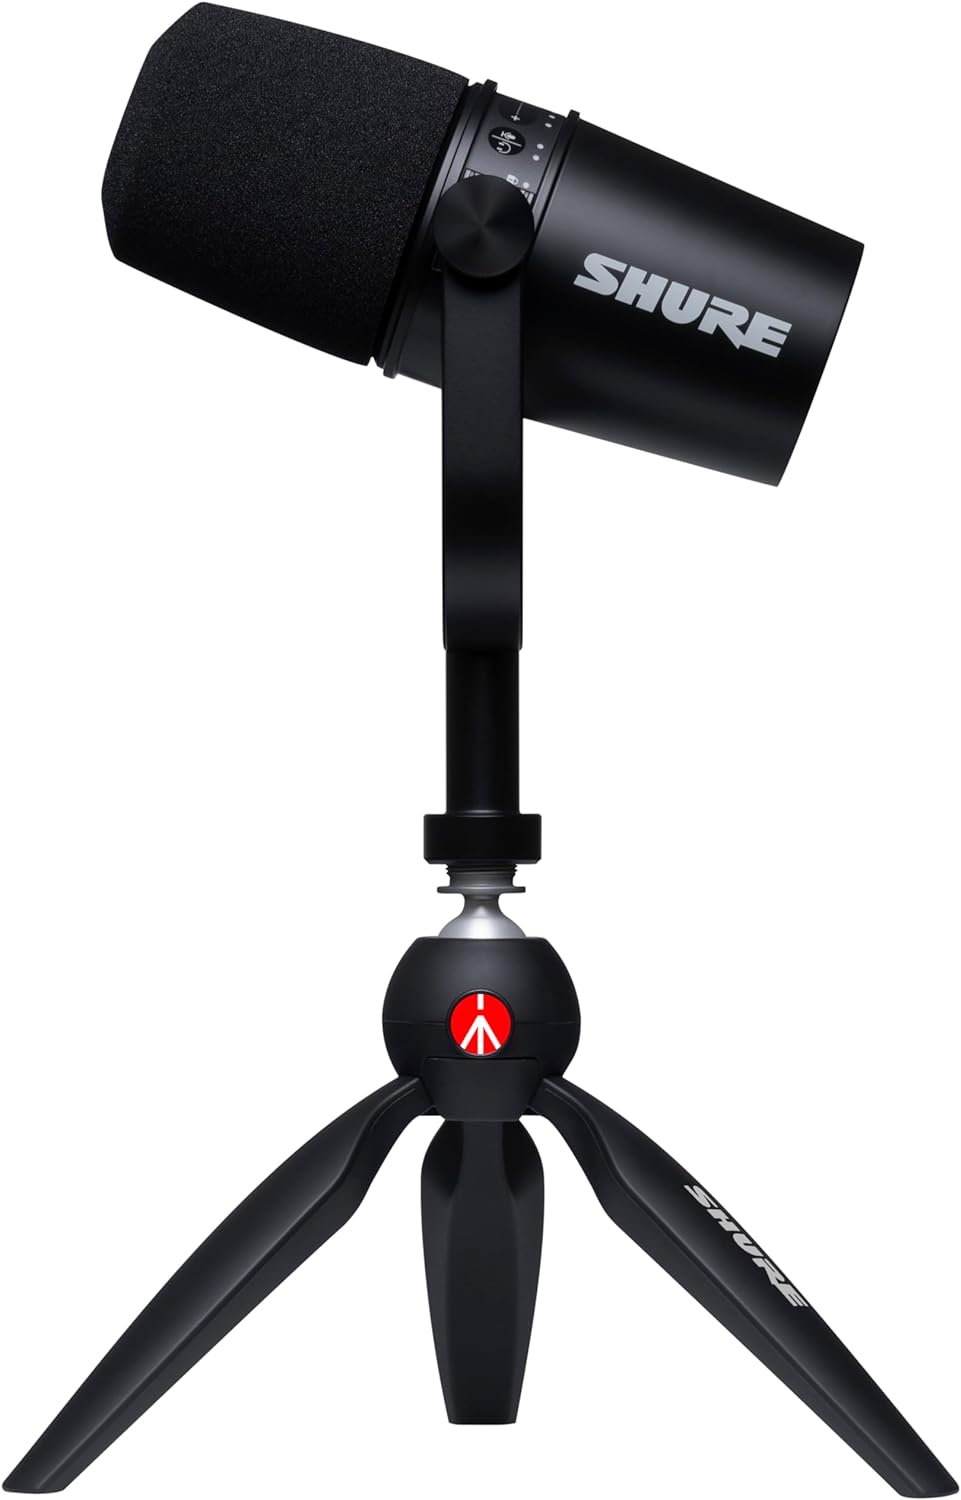 Shure MV7 USB Microphone with Tripod, for Podcasting, Recording, Streaming & Gaming, Built-In Headphone Output, All Metal USB/XLR Dynamic Mic, Voice-Isolating Tech - Black (Official KSA Version)